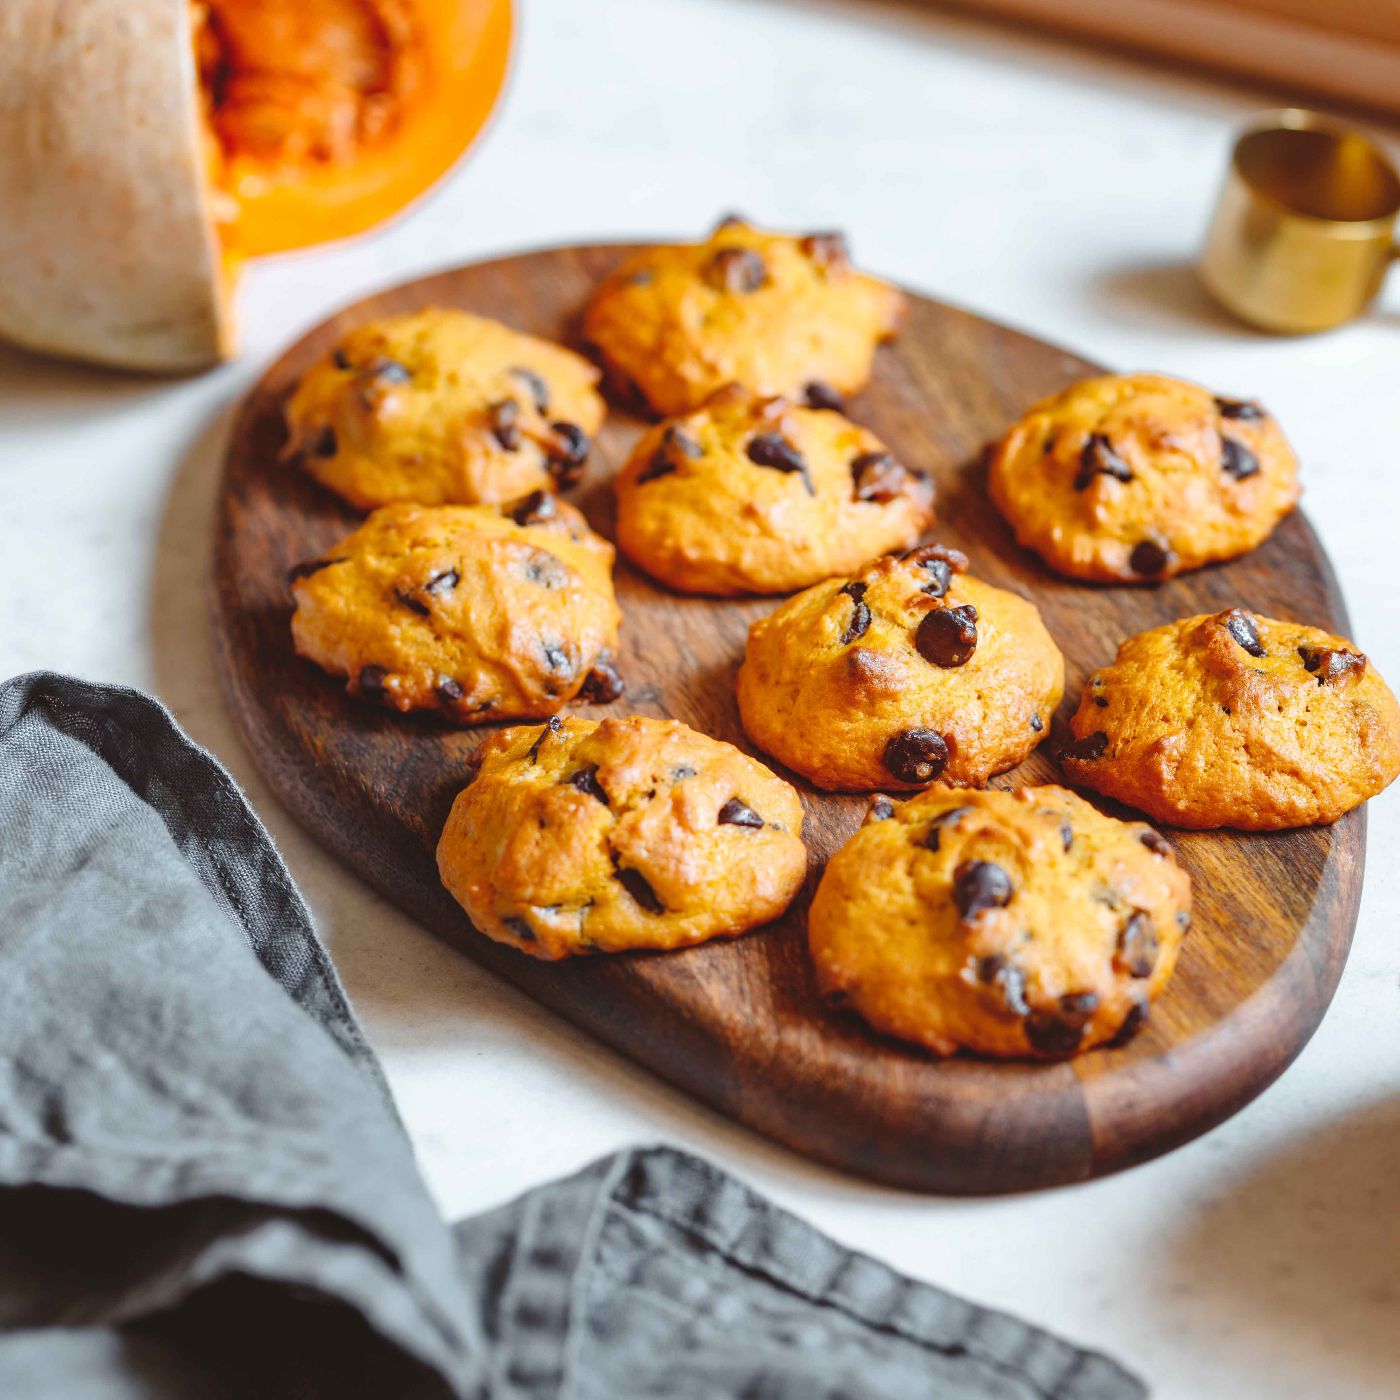 Pumpkin-cookies-with-chocolate-chips-made-from-cake-mix-on-a-wooden-tray.-1161533566_6240x4160 square.jpg